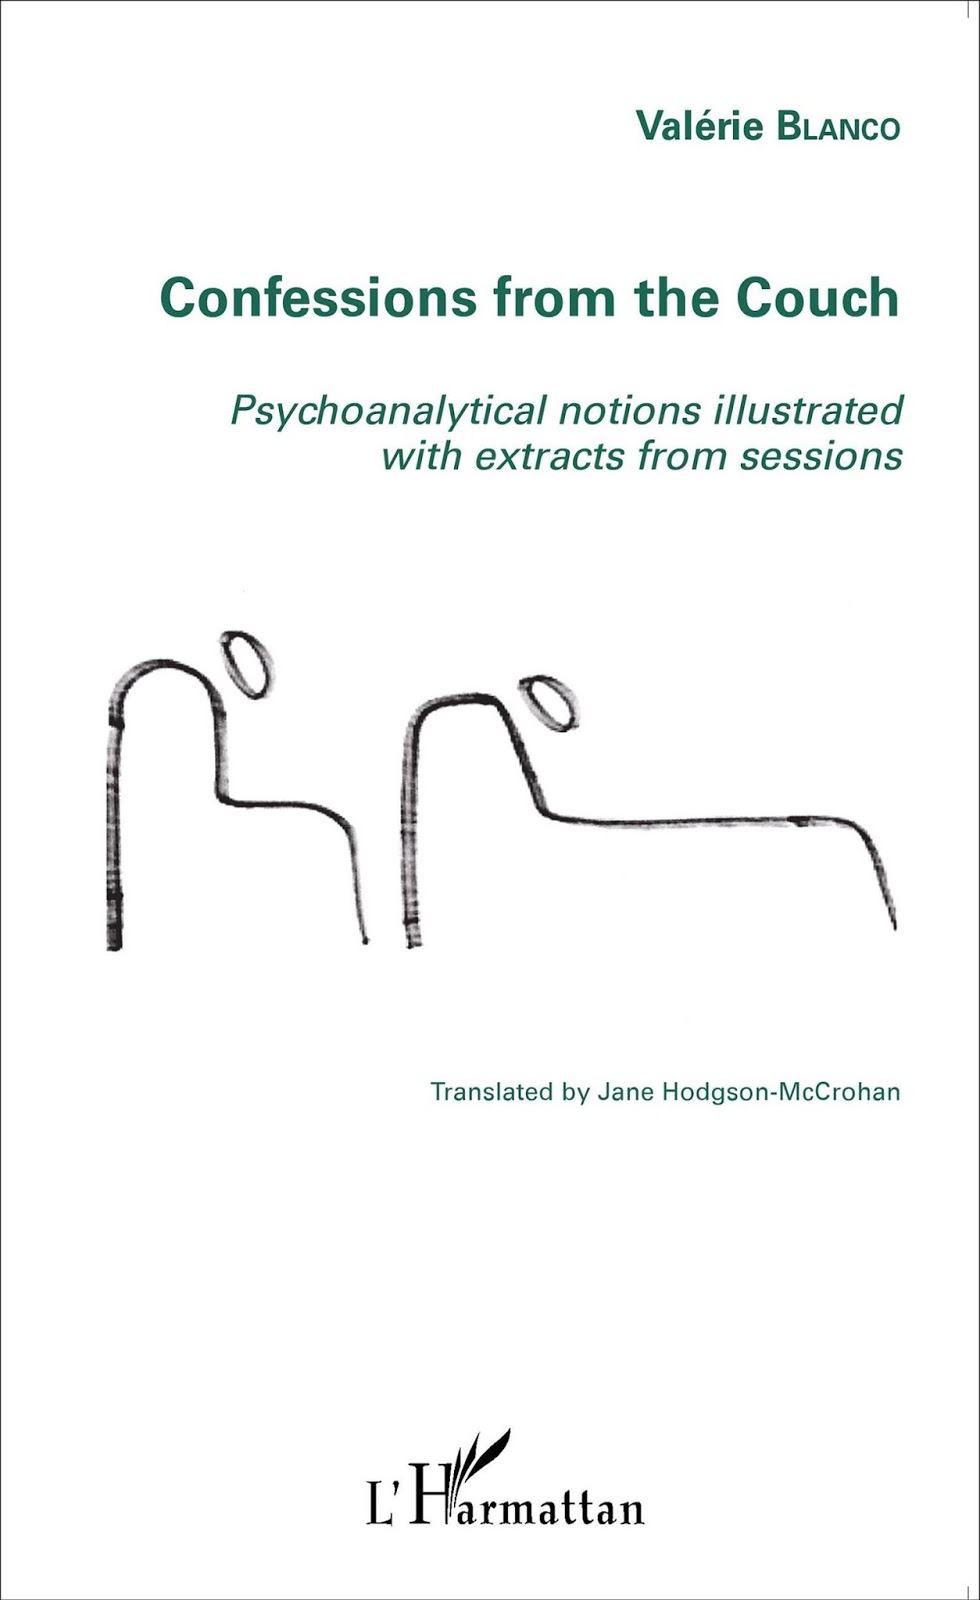 Confessions from the Couch Psychoanalytical notions illustrated with extracts from sessions